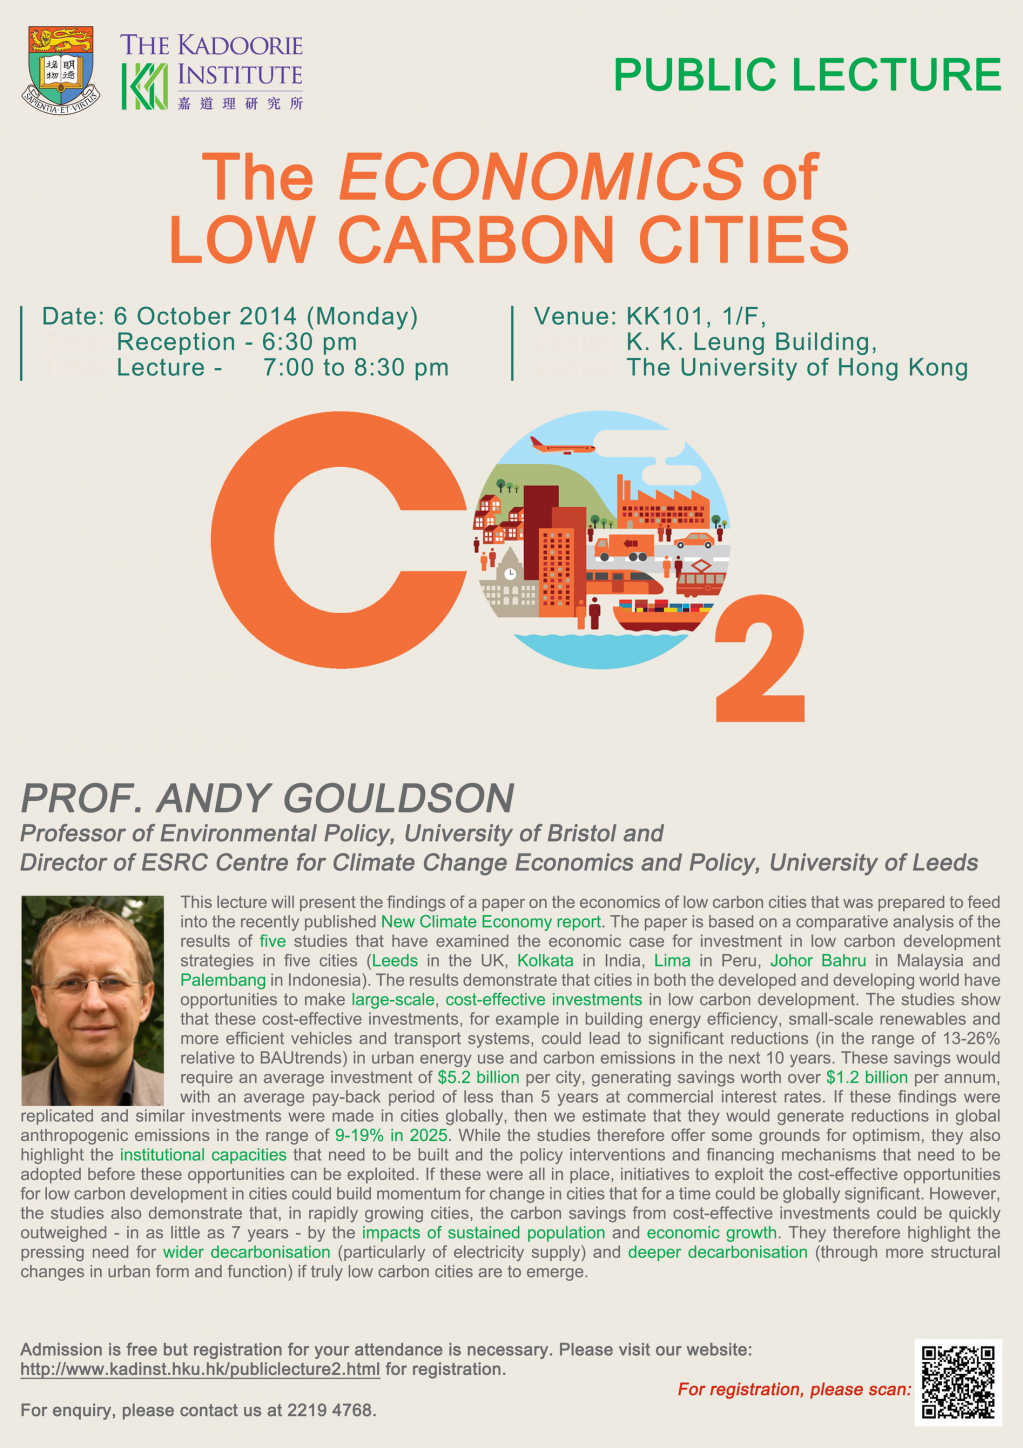 Public Lecture on The Economics of Low Carbon Cities